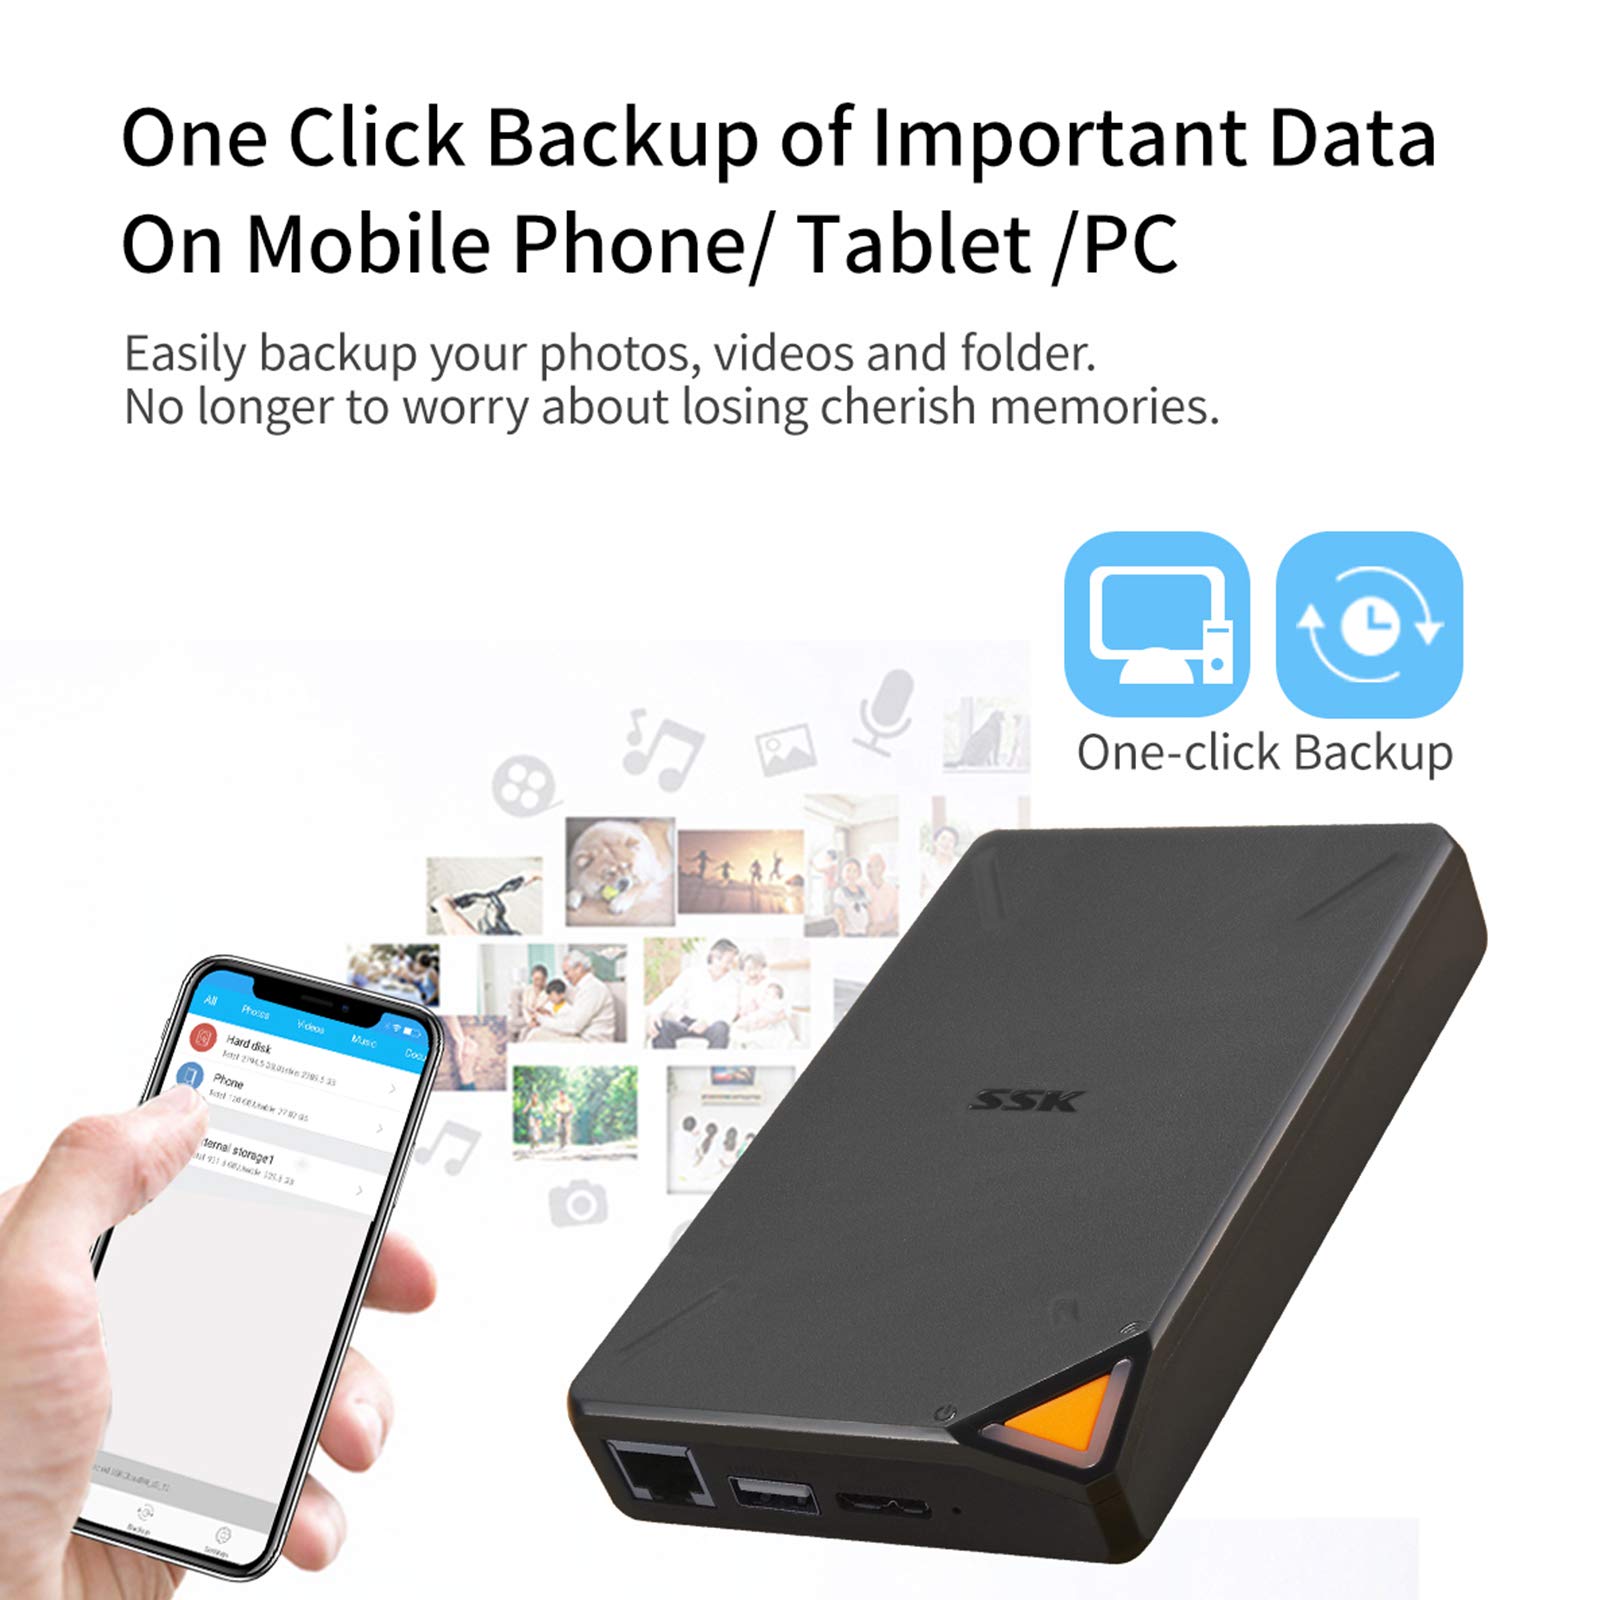 NAS (Network Attached Storage): A more advanced option that allows you to store and access your photos on a local network.
PhotoStick: A device specifically designed for photo backup that automatically finds and backs up all your photos and videos.